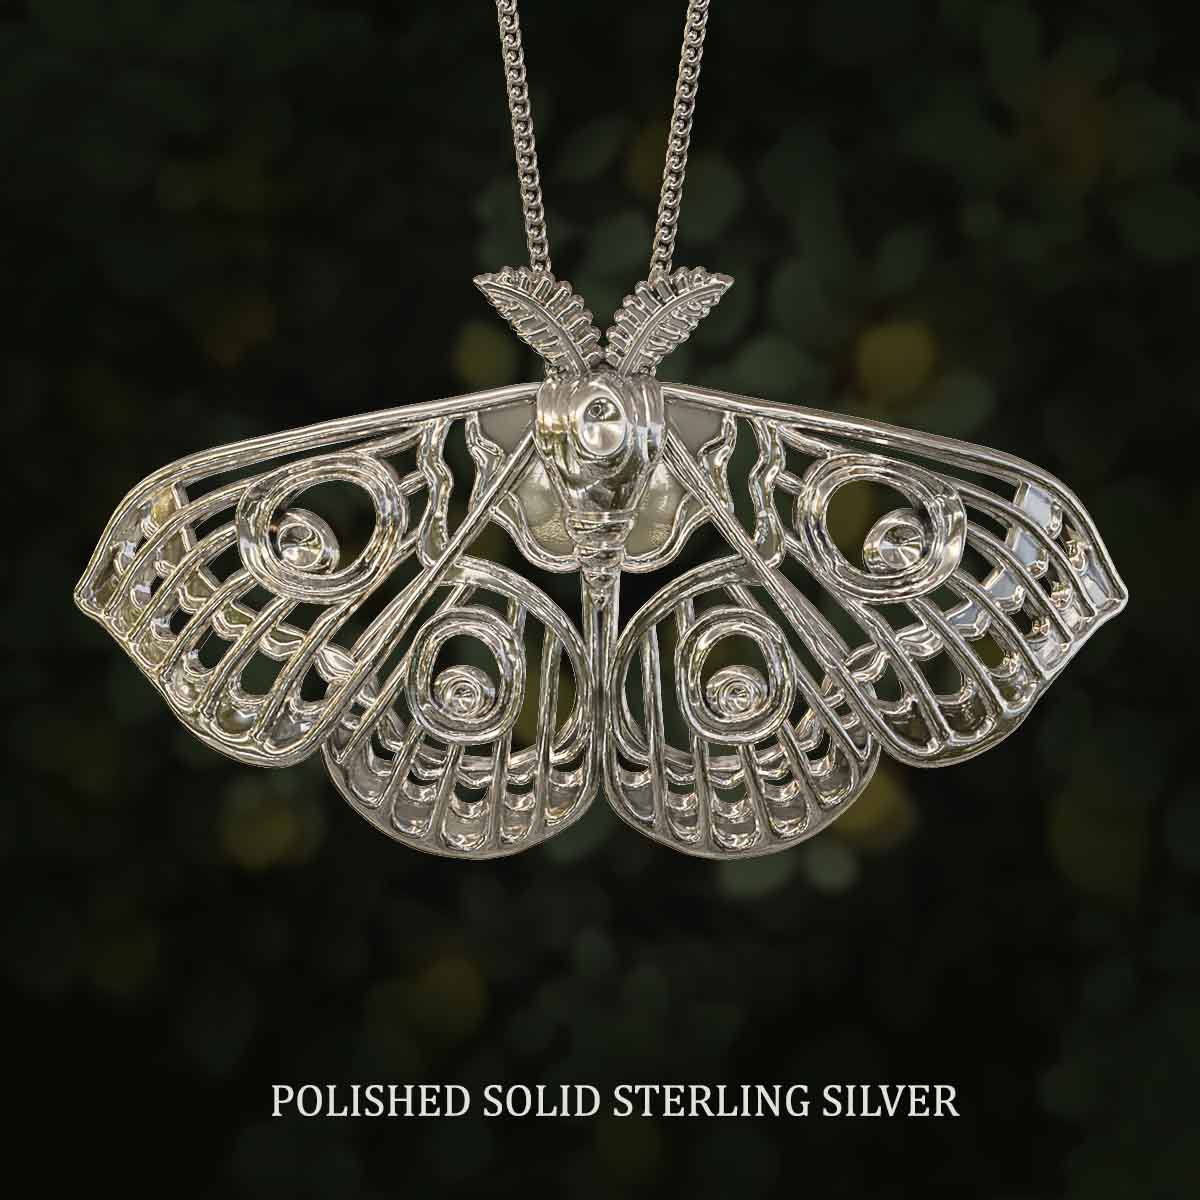 Polished-Solid-Sterling-Silver-Arabella-Moth-Pendant-Jewelry-For-Necklace